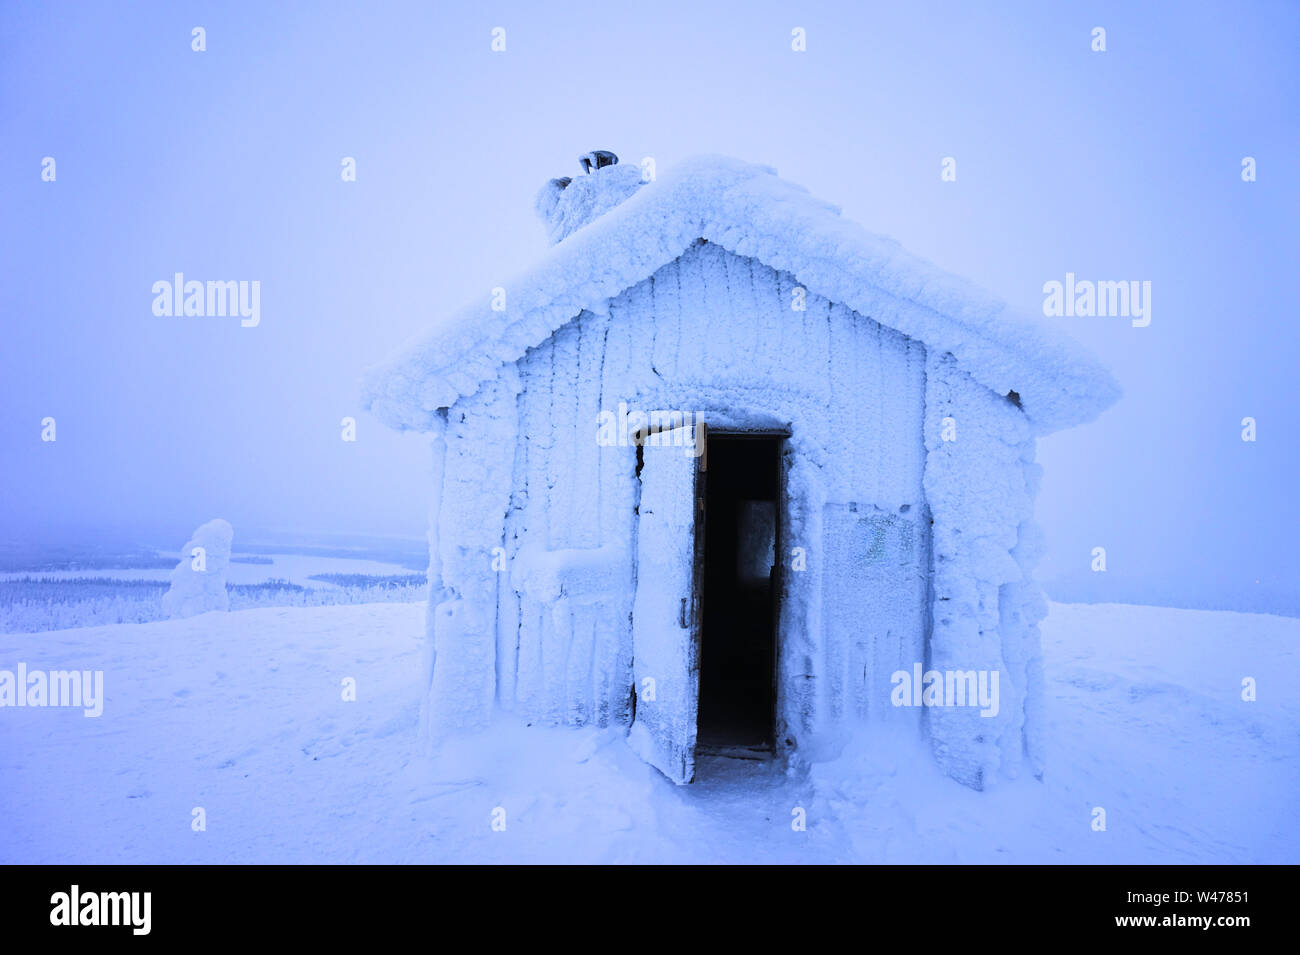 Frozen shelter at the top of Valtavaara, Finland Stock Photo